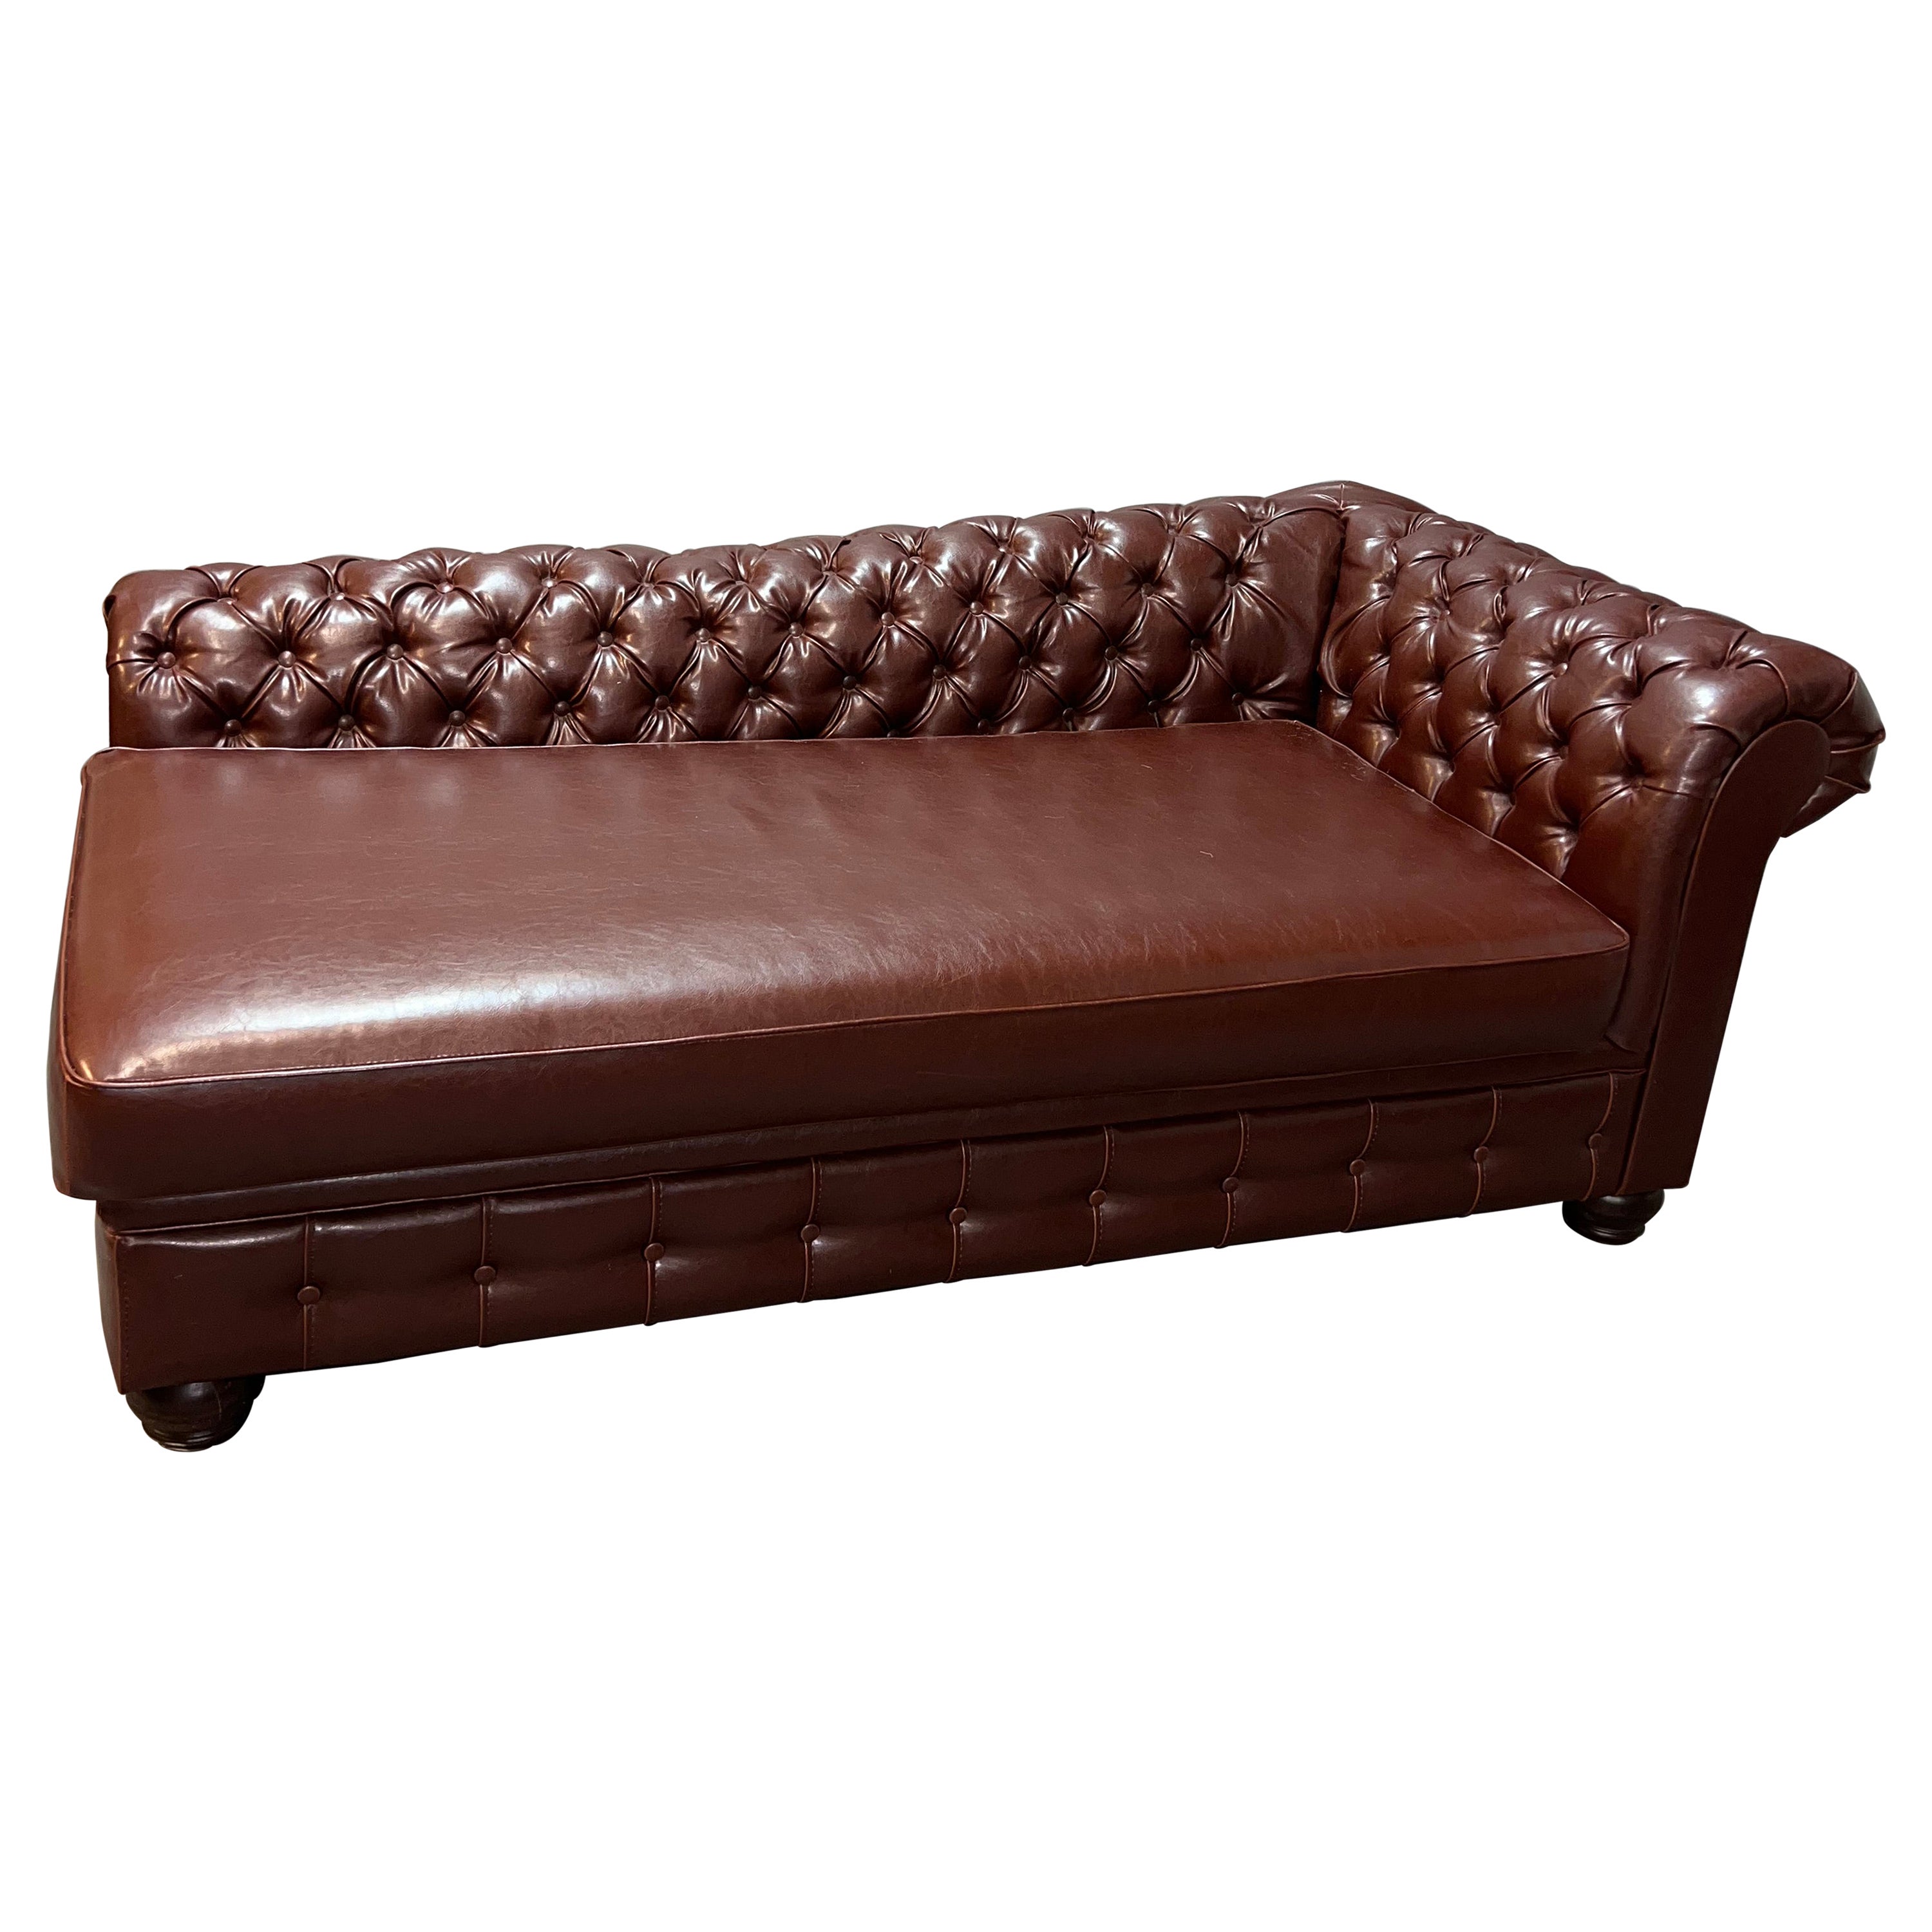 Lovely Vintage Chesterfield Brown Leder Look Chaise Lounge Daybed Sofa